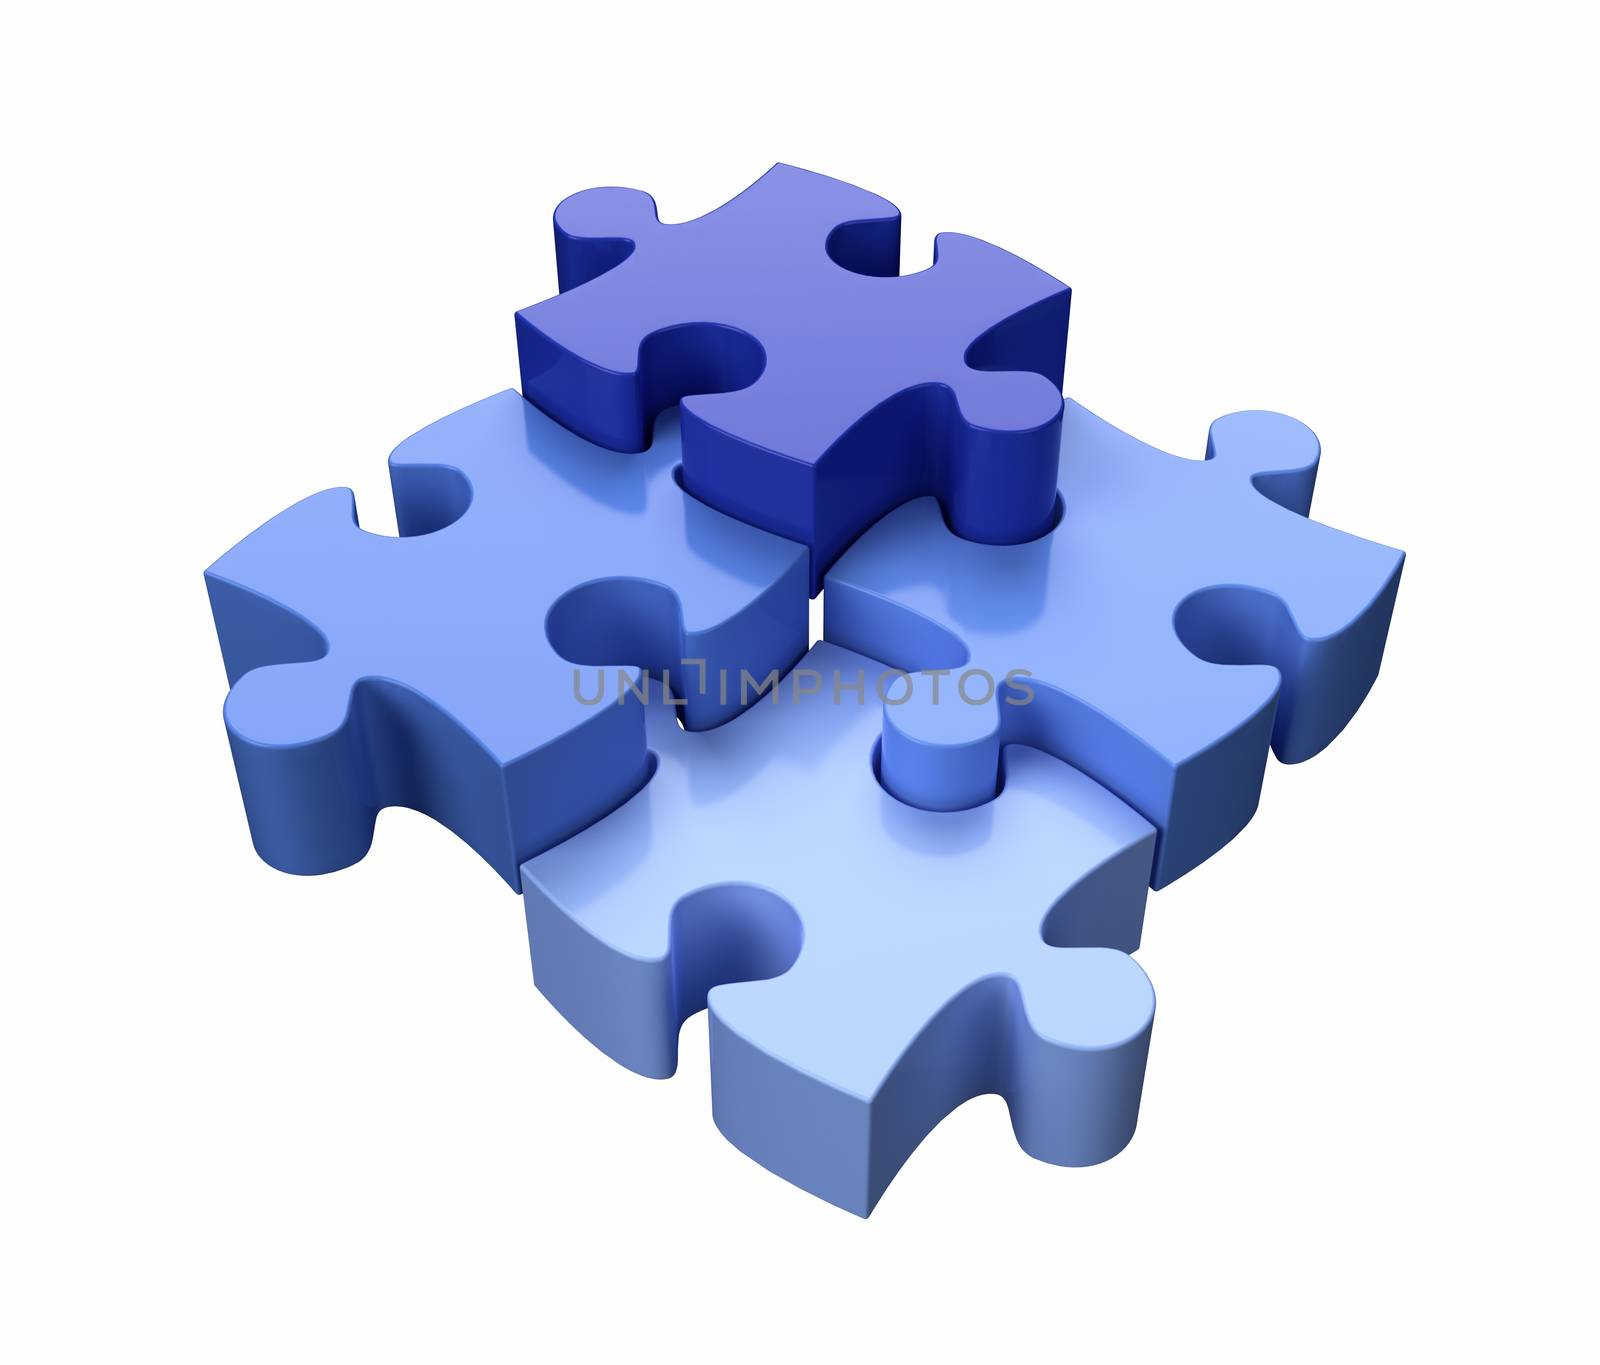 Four Jigsaw Puzzle Pieces Blue on White Background